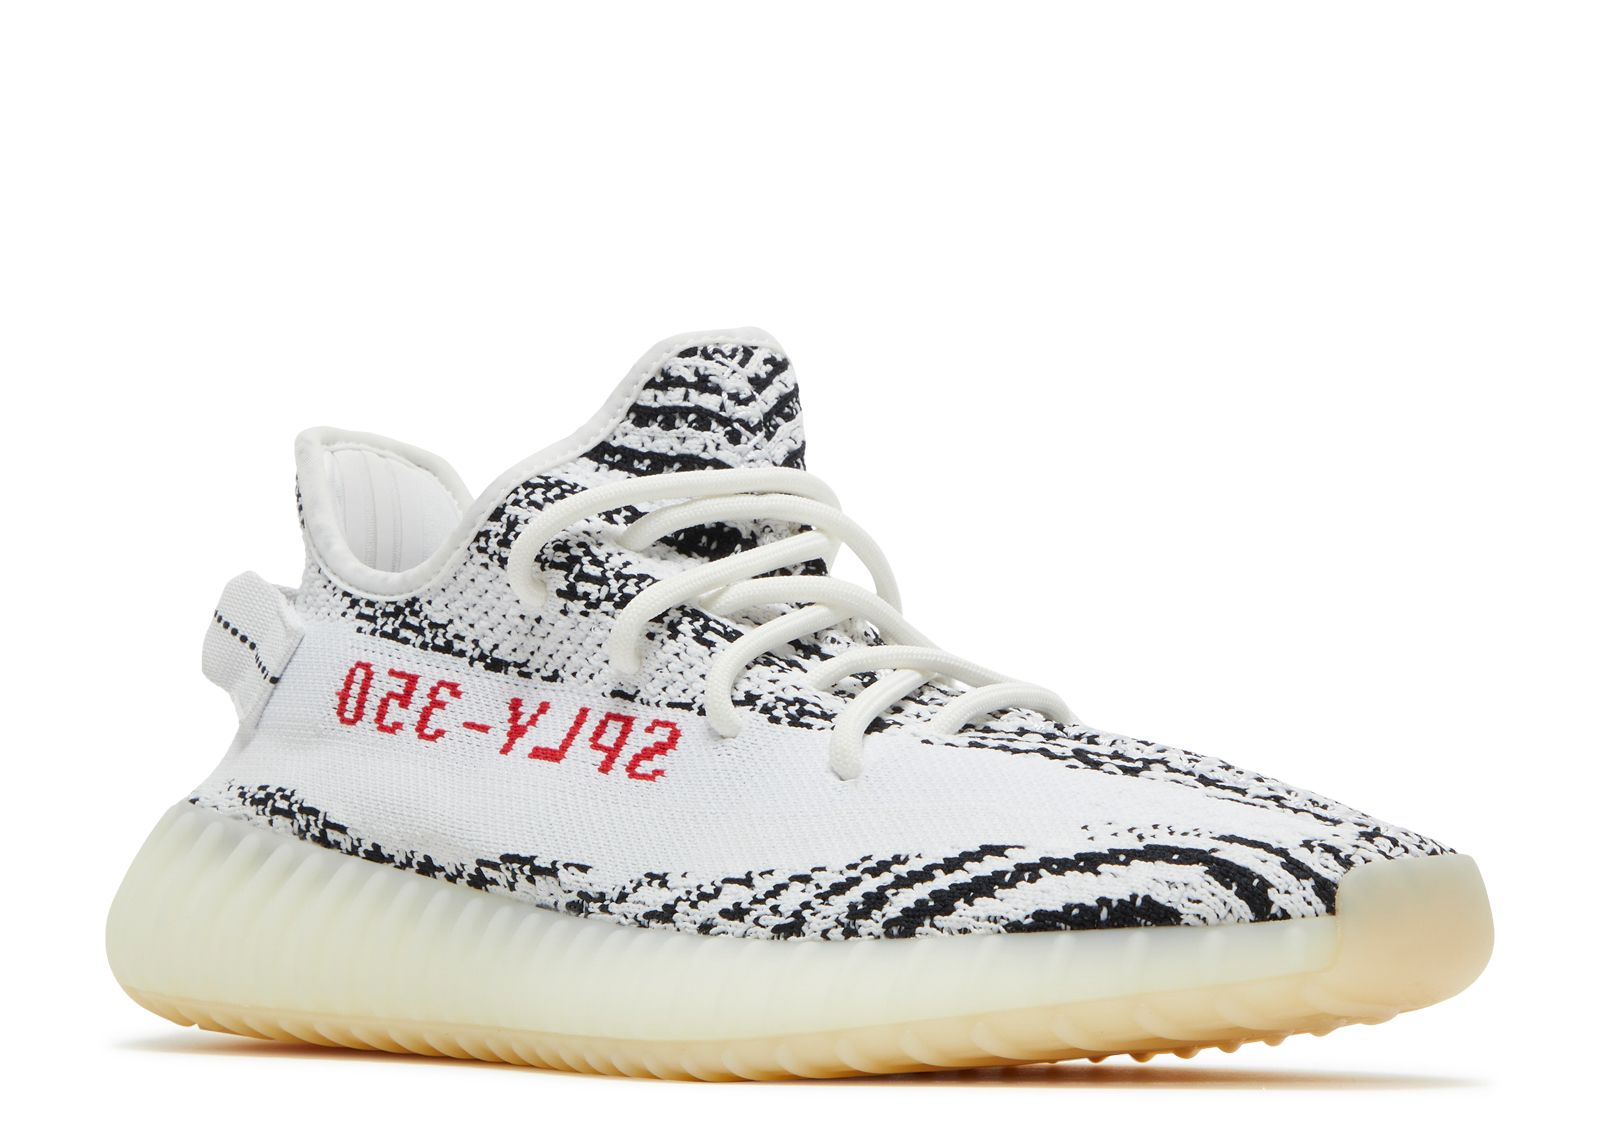 [FIND] YEEZY BOOST 350 V2 Code name: Blade : Repsneakers